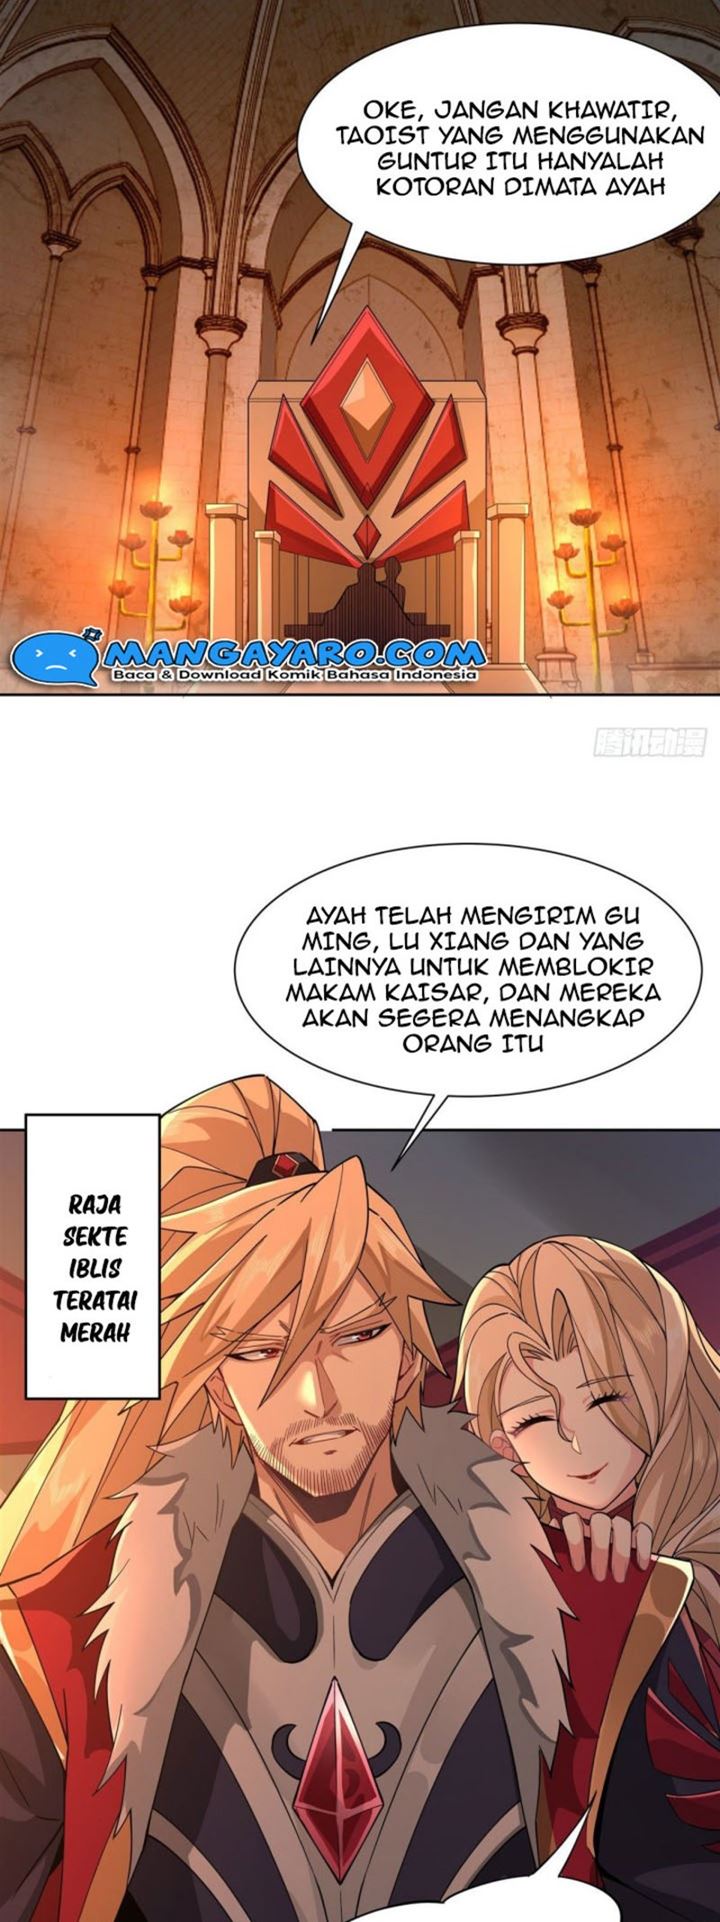 Dilarang COPAS - situs resmi www.mangacanblog.com - Komik my female apprentices are all big shots from the future 020 - chapter 20 21 Indonesia my female apprentices are all big shots from the future 020 - chapter 20 Terbaru 2|Baca Manga Komik Indonesia|Mangacan